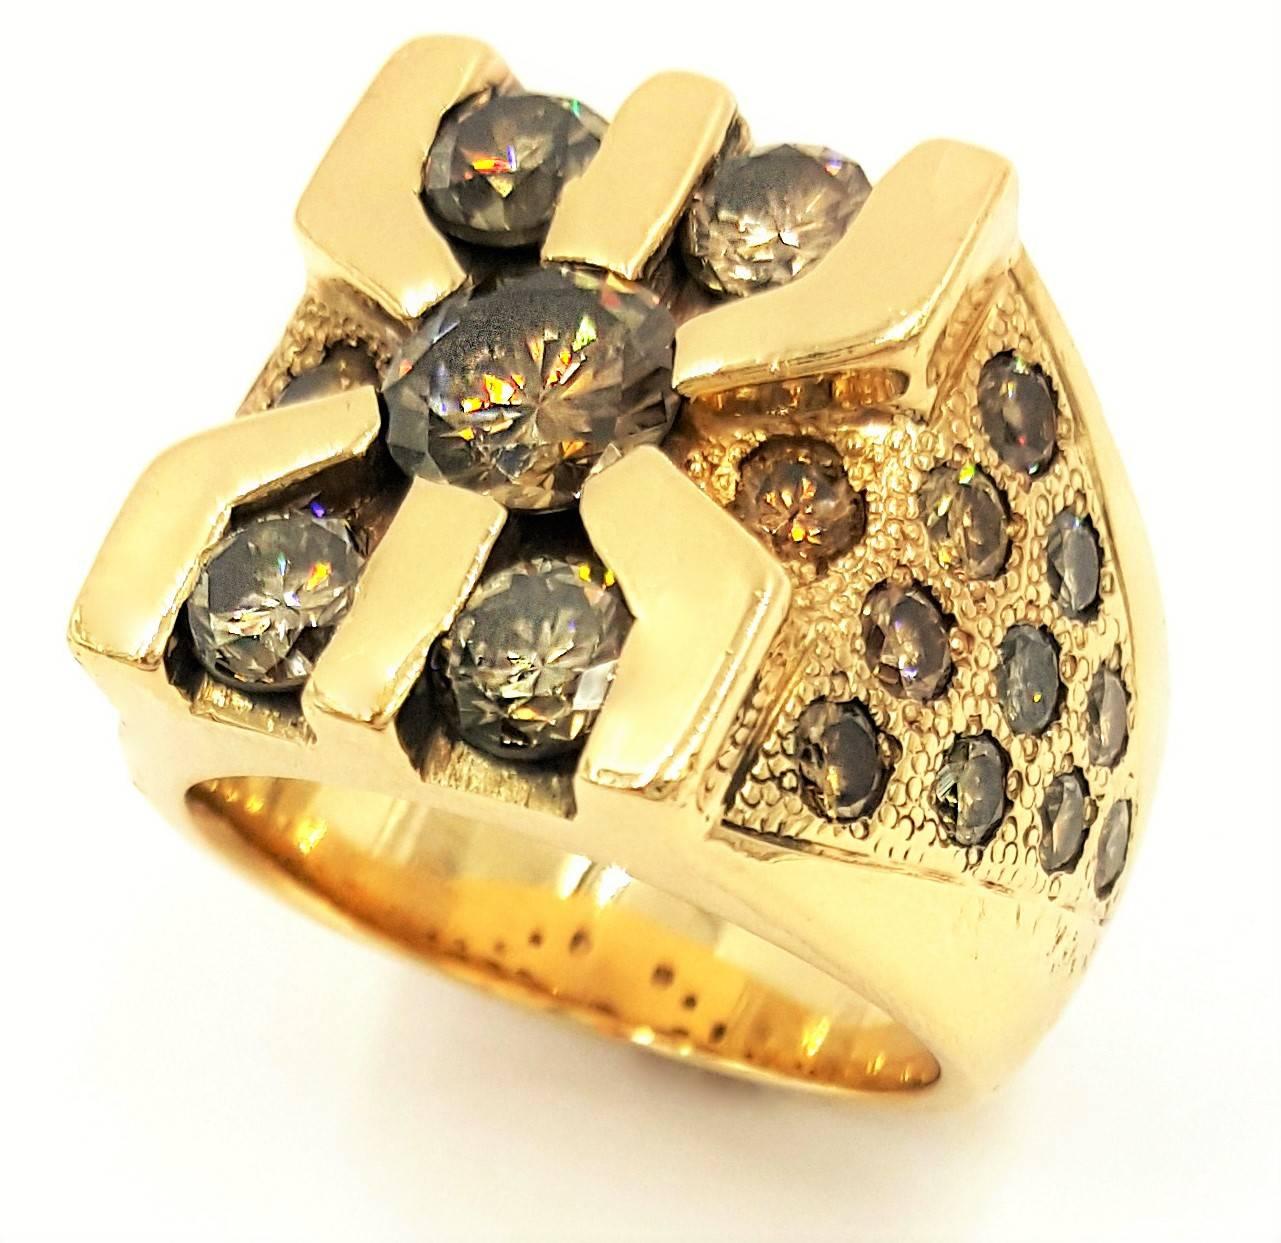 This gorgeous solid constructed heavy 14kt Yellow Gold 